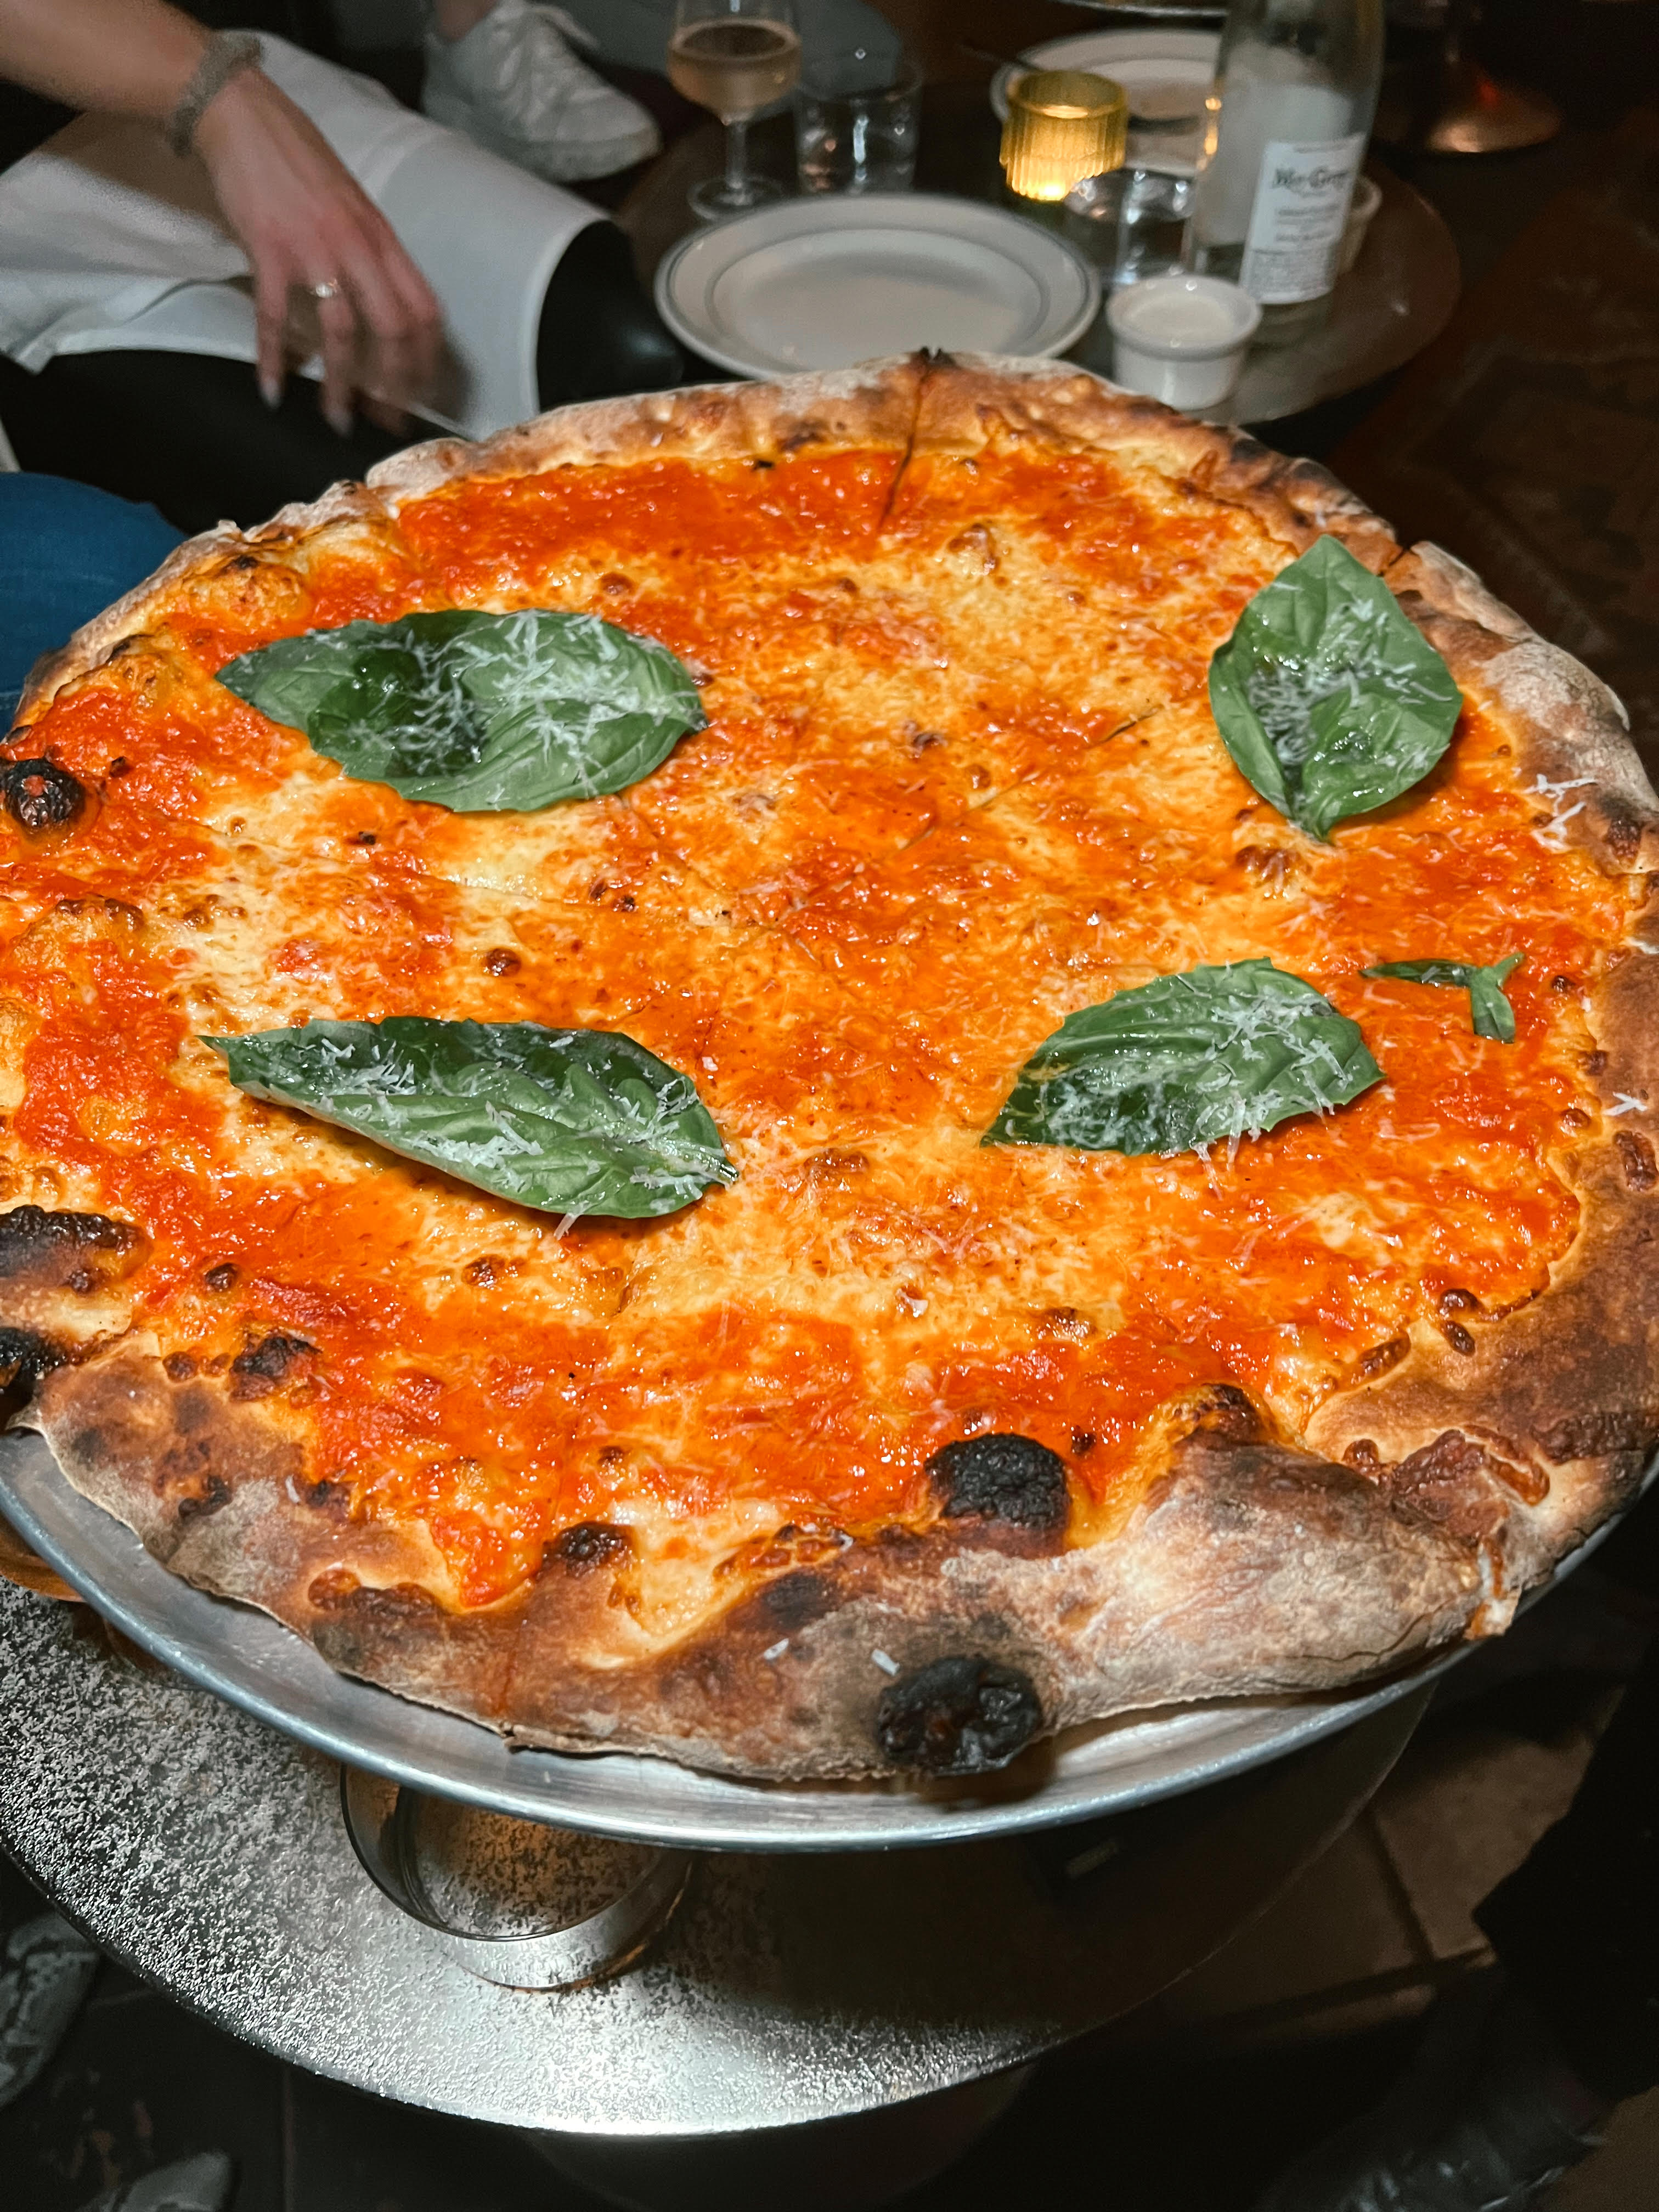 A pizza with reddish-orange sauce and green leaves.